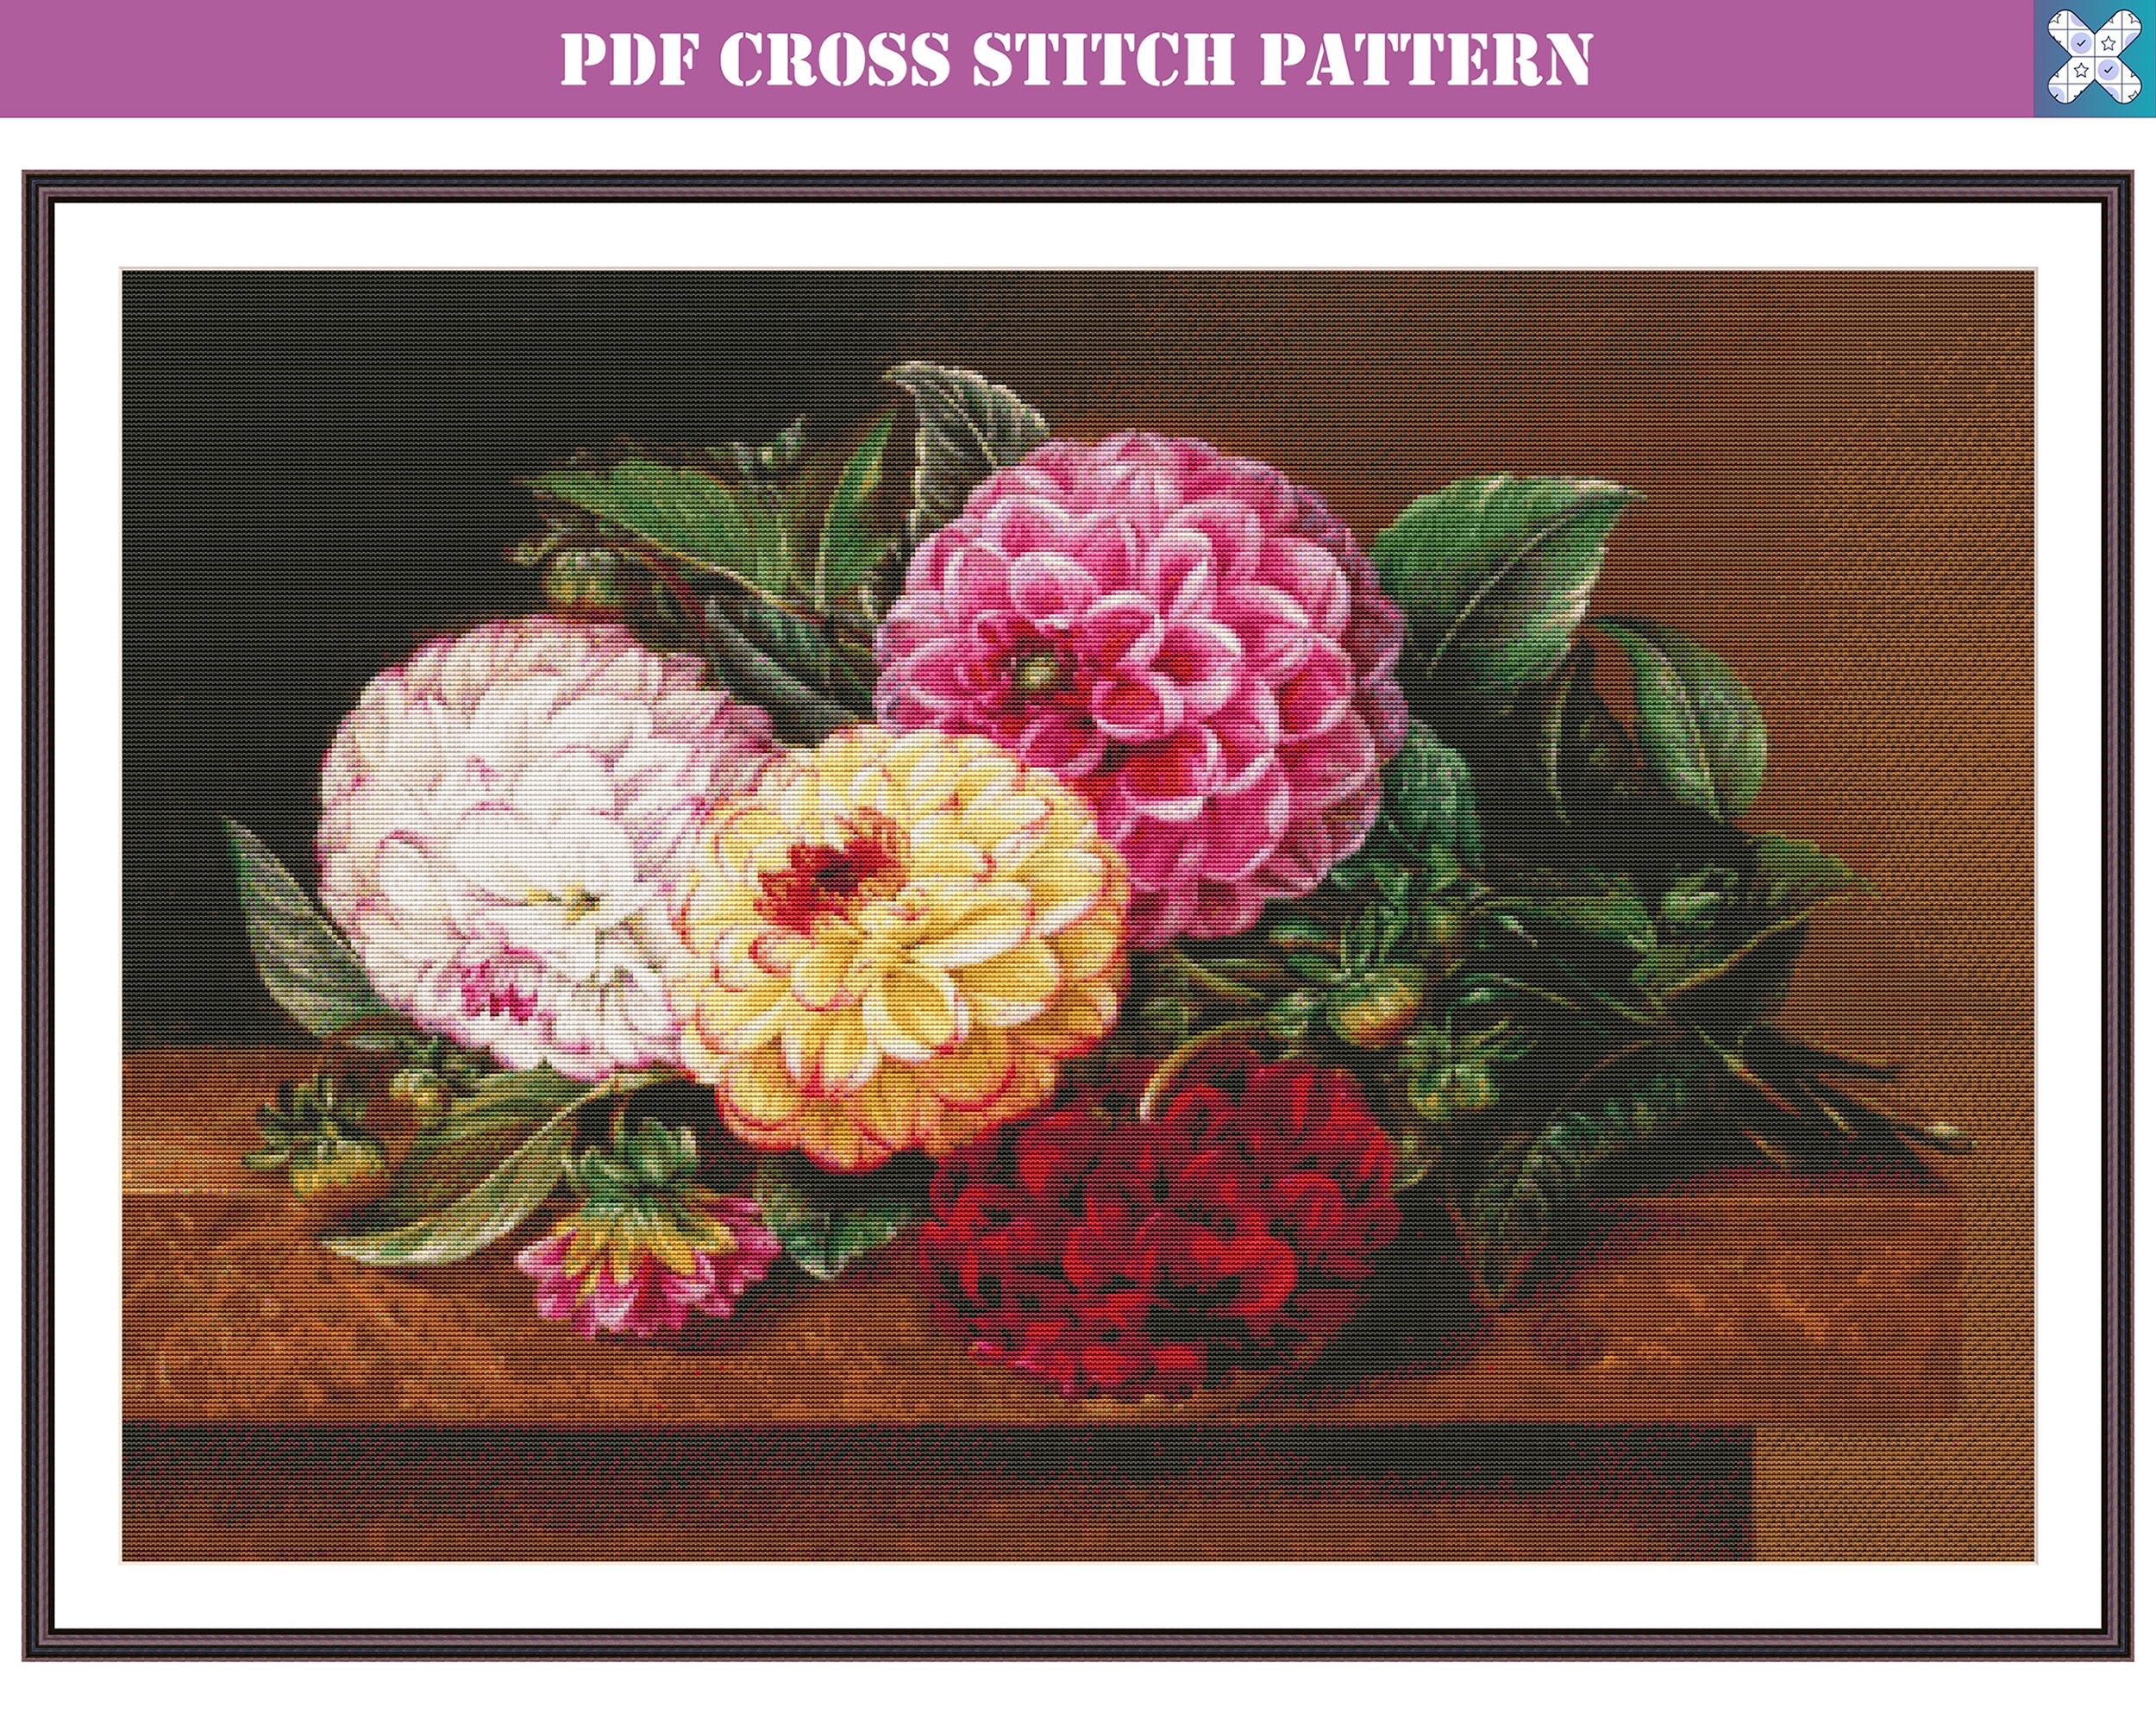 SUPERSIZED Fun Full Coverage Cross Stitch Pattern Digital Download PDF  Compatible With Pattern Keeper App. High Difficulty Modern Design. 